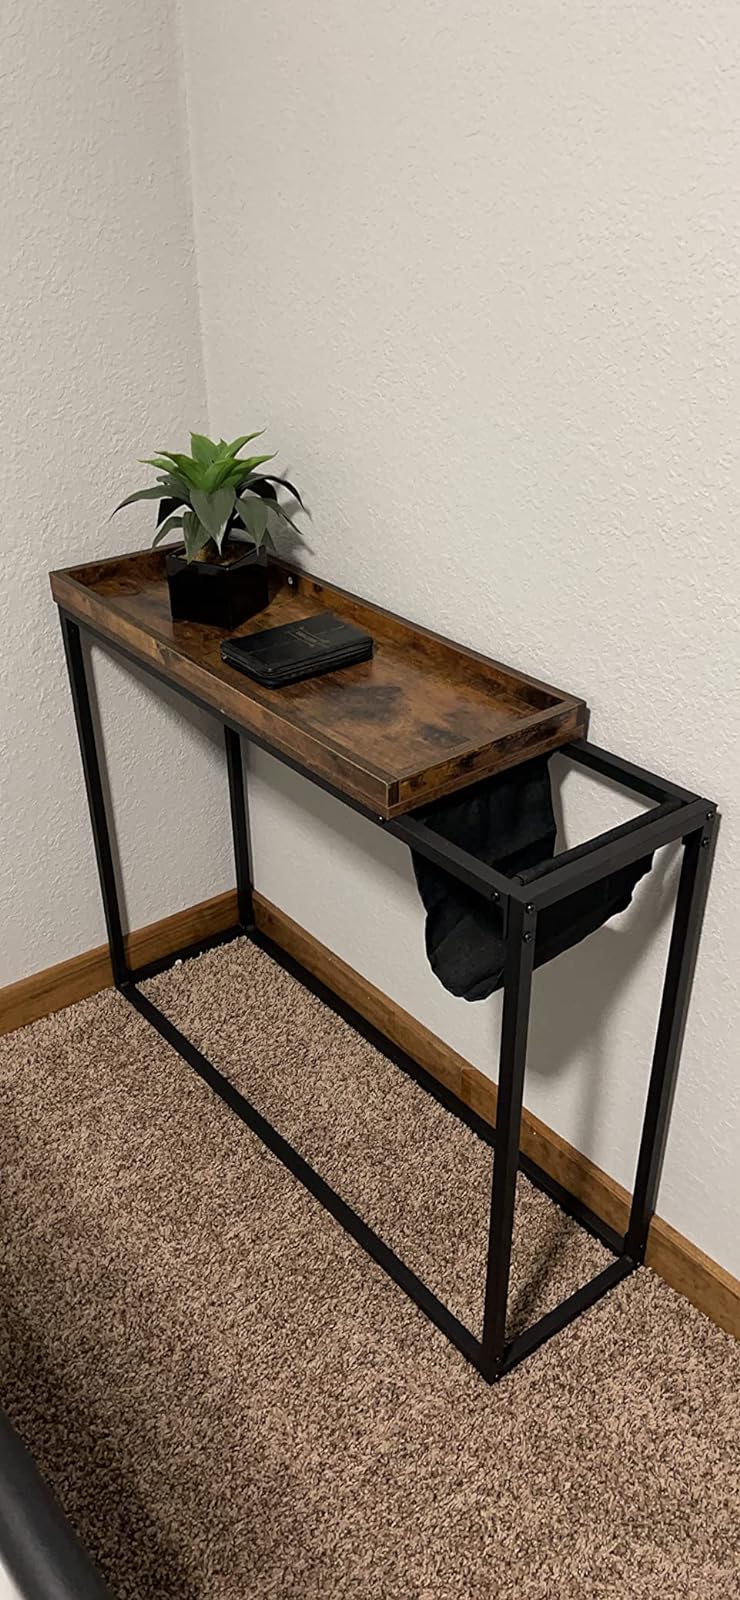 BF80XG01 Console Table photo review